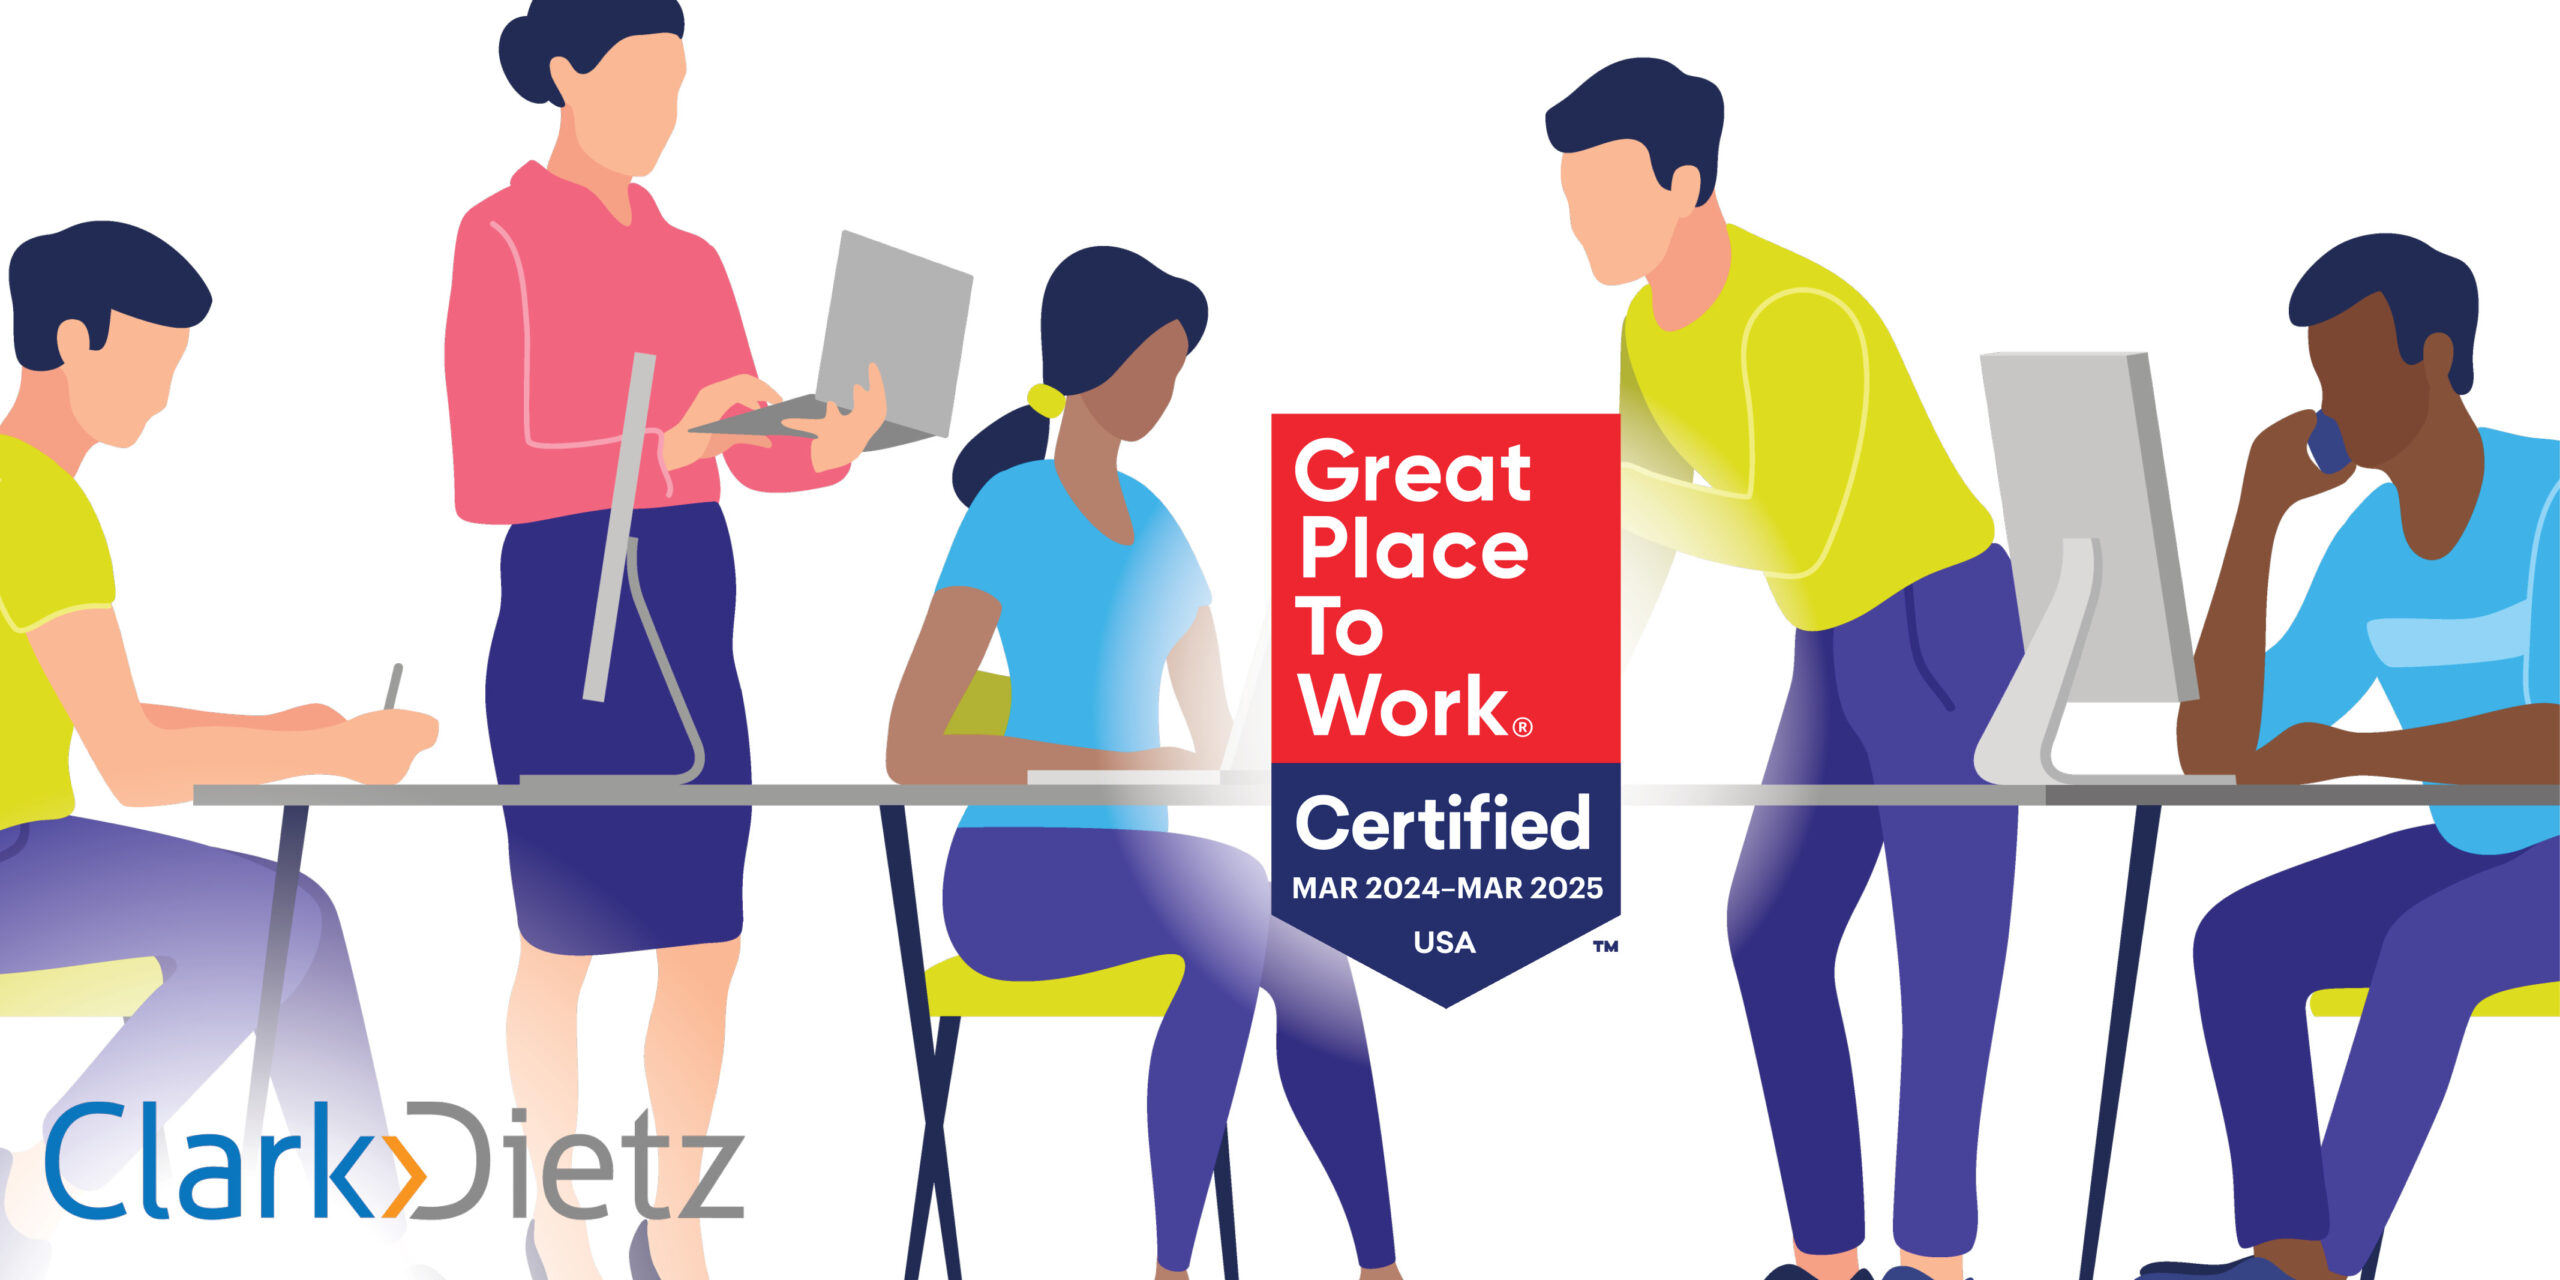 clark dietz is great place to work certified through march of 2025